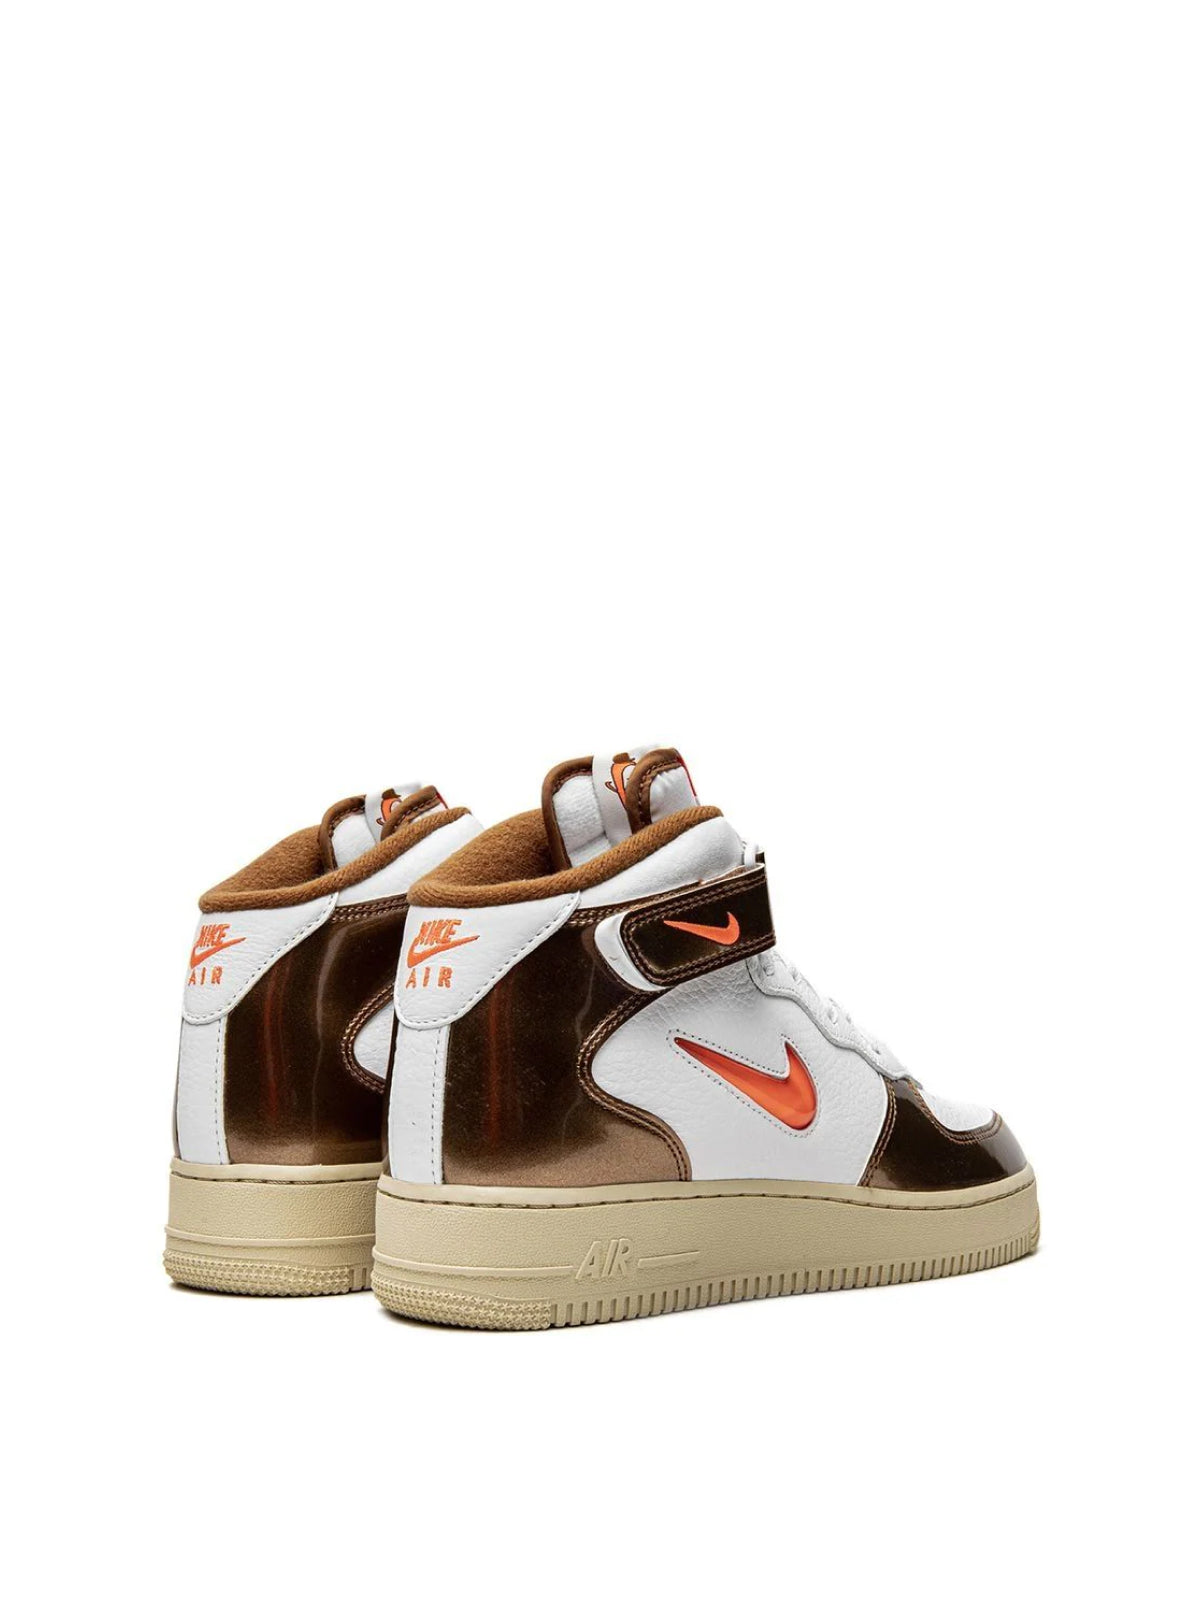 Nike-OUTLET-SALE-Air Force 1 Mid QS Jewel Sneakers-ARCHIVIST